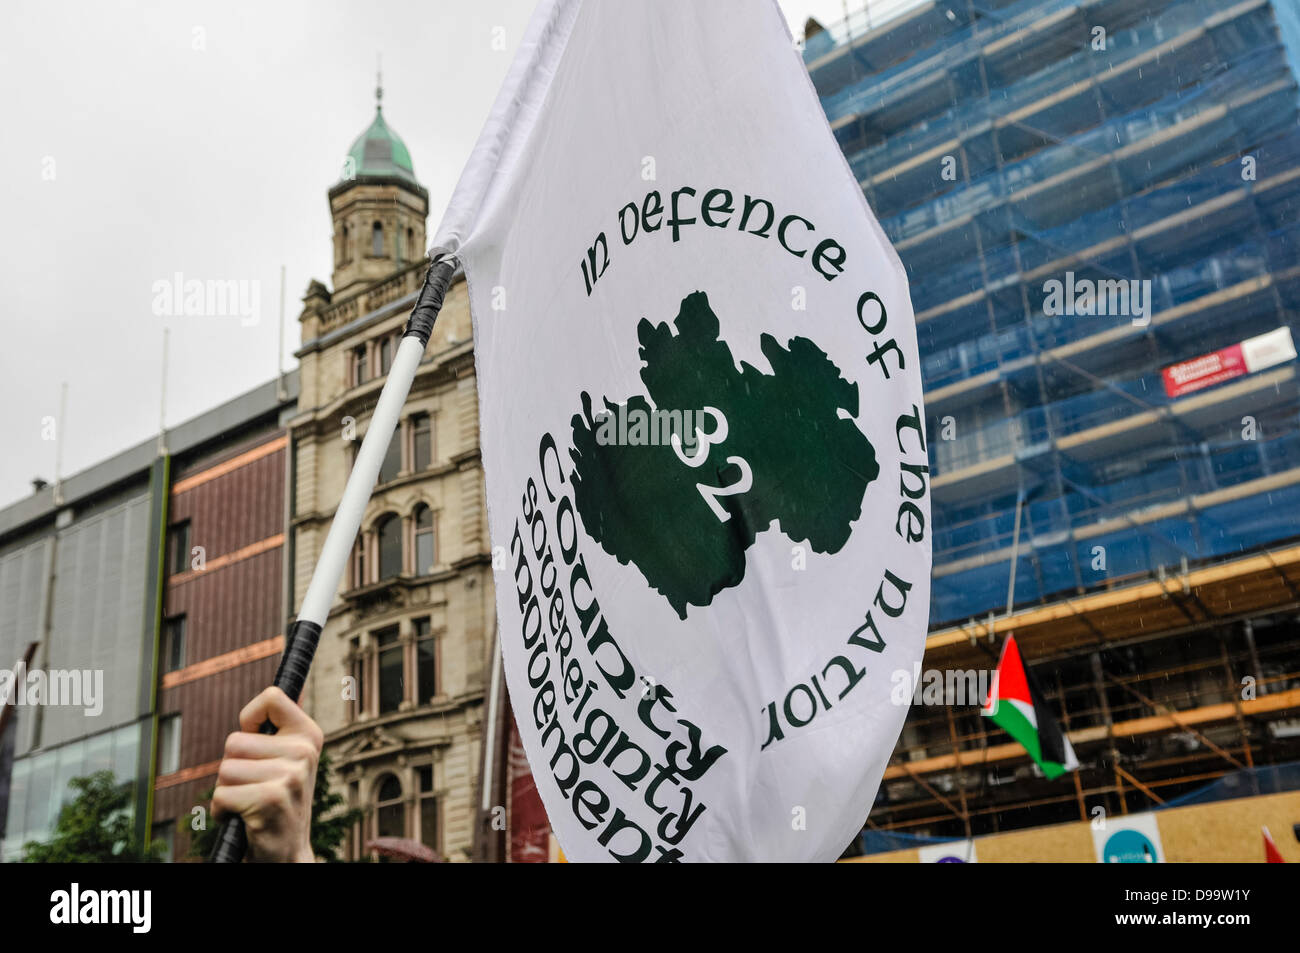 Belfast, Northern Ireland. 15th June 2013. The Irish Republican movement, the 32 County Sovereignty Committee hold their flag at an anti-G8 protest organised by the Irish Congress of Trade Unions (ICTU) Credit:  Stephen Barnes/Alamy Live News Stock Photo